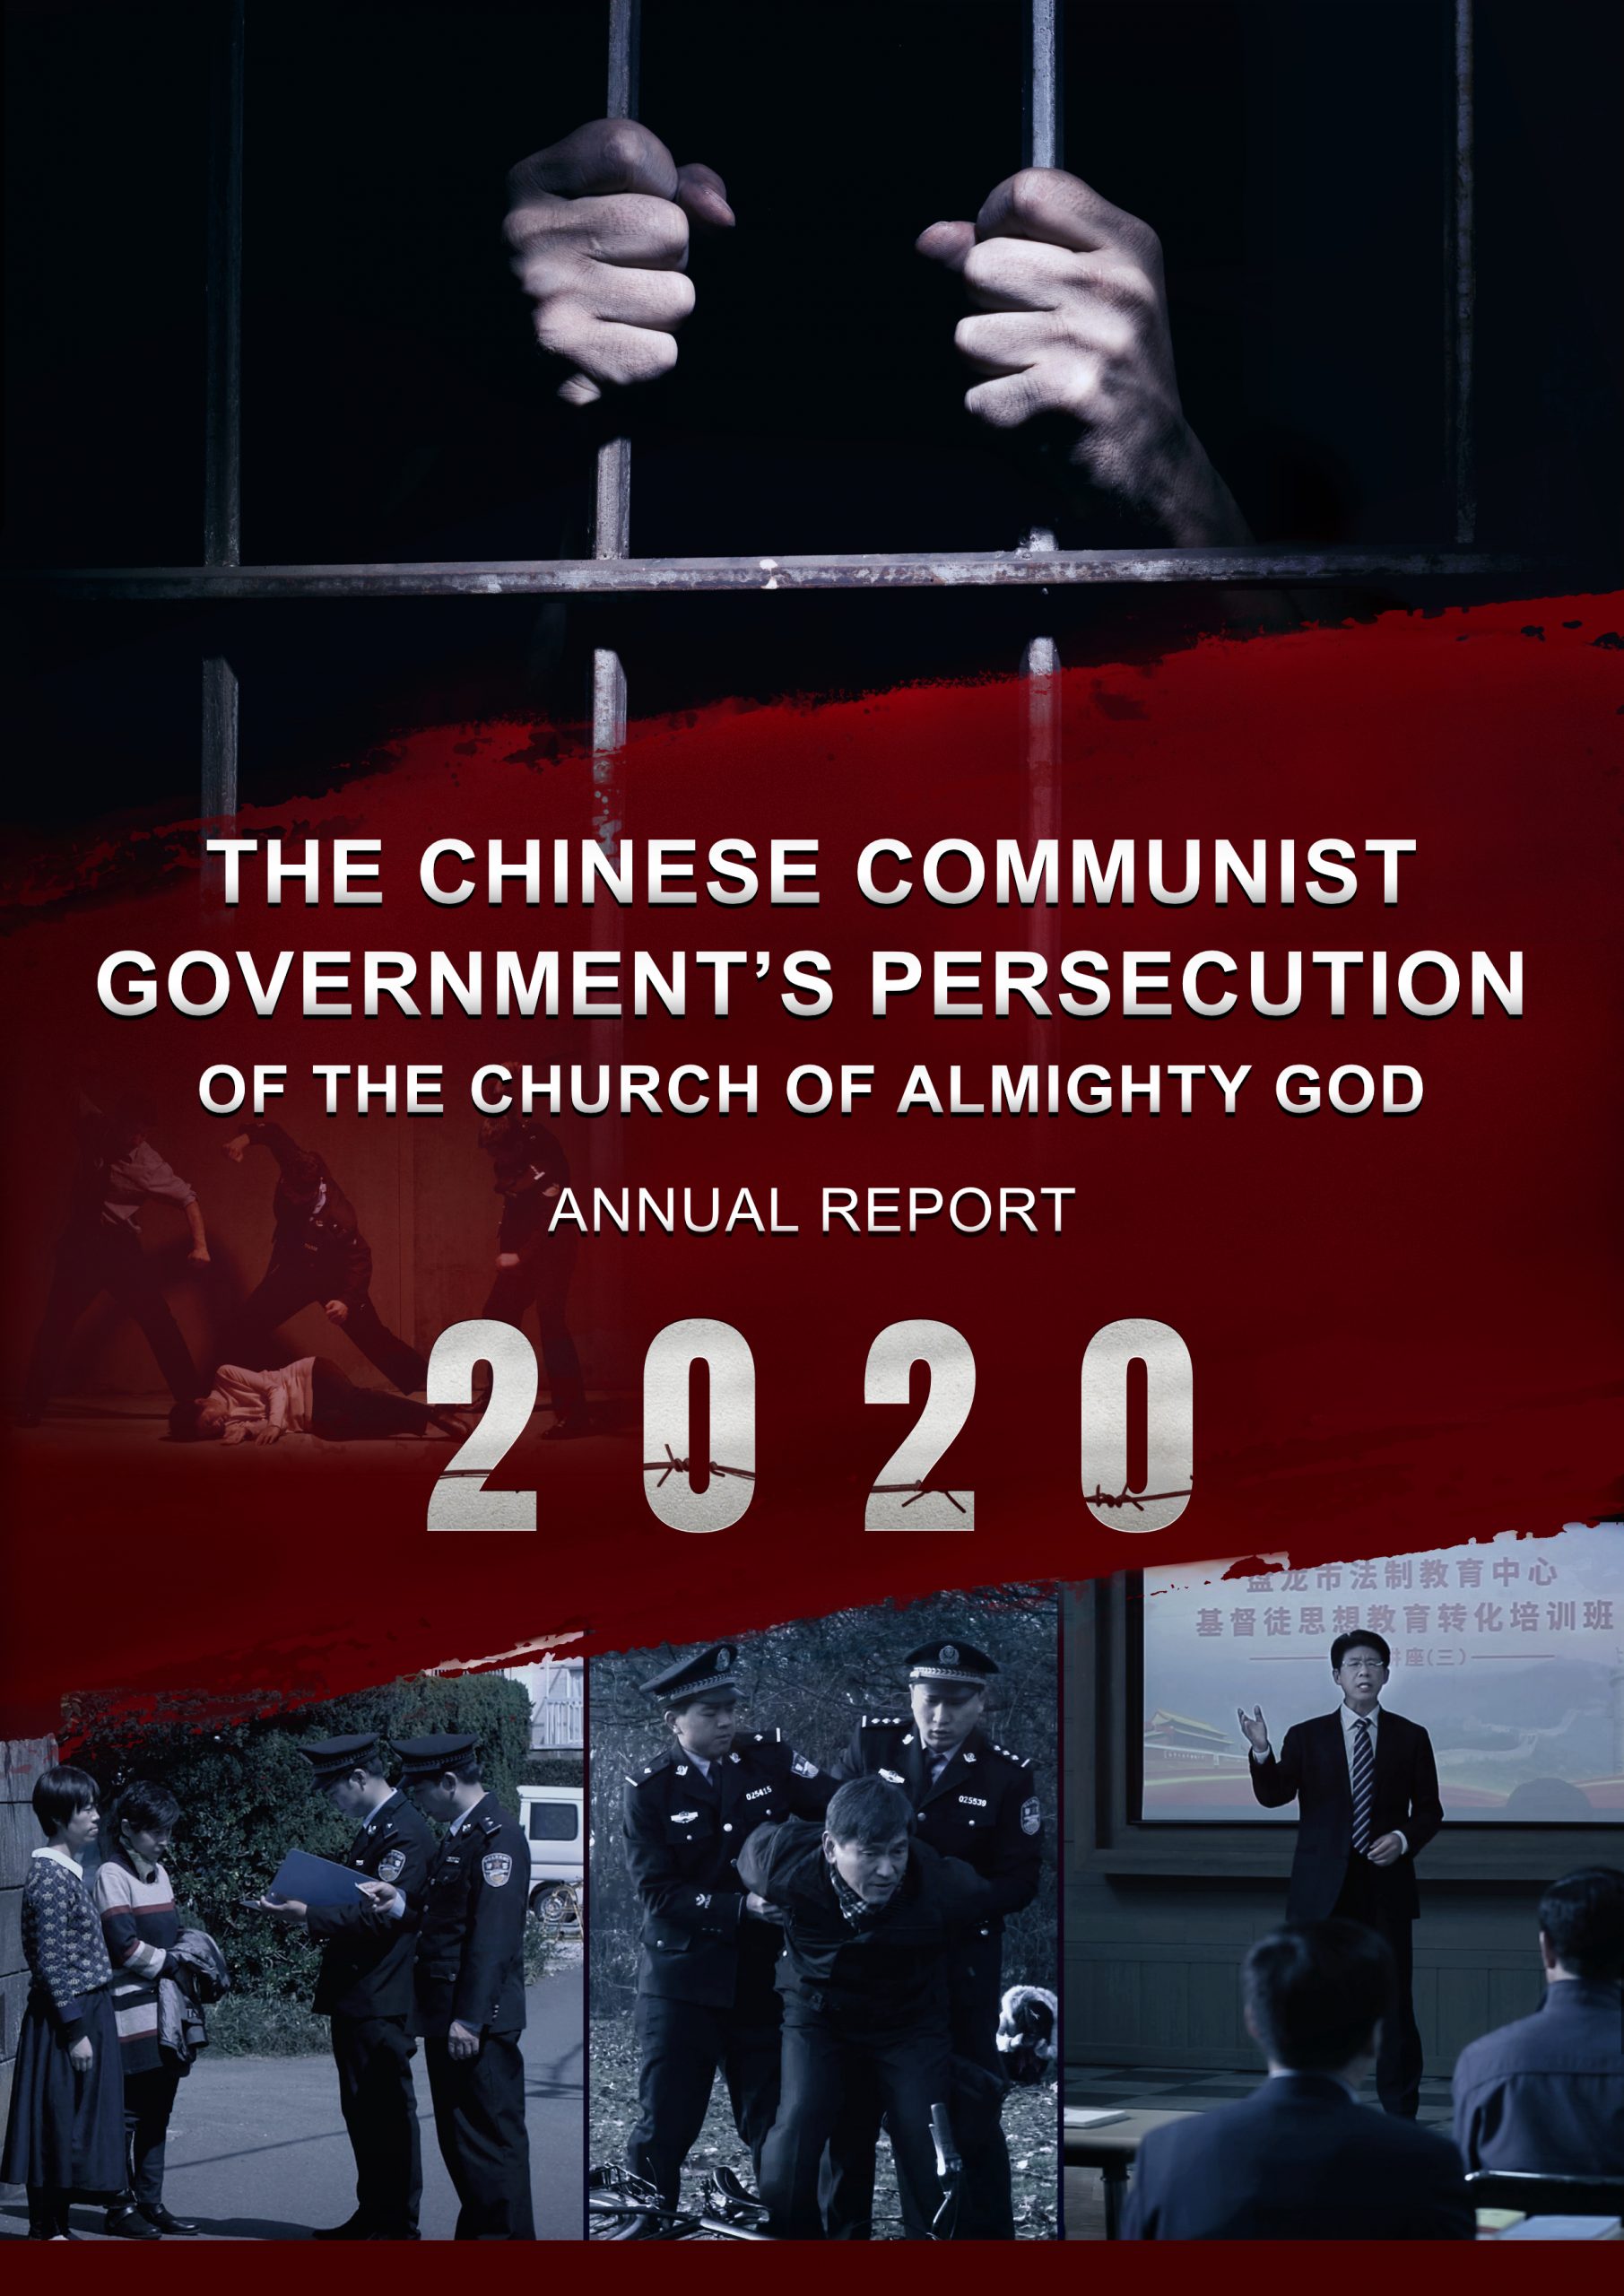 2020 Annual Report on the Chinese Communist Government’s Persecution of The Church of Almighty God